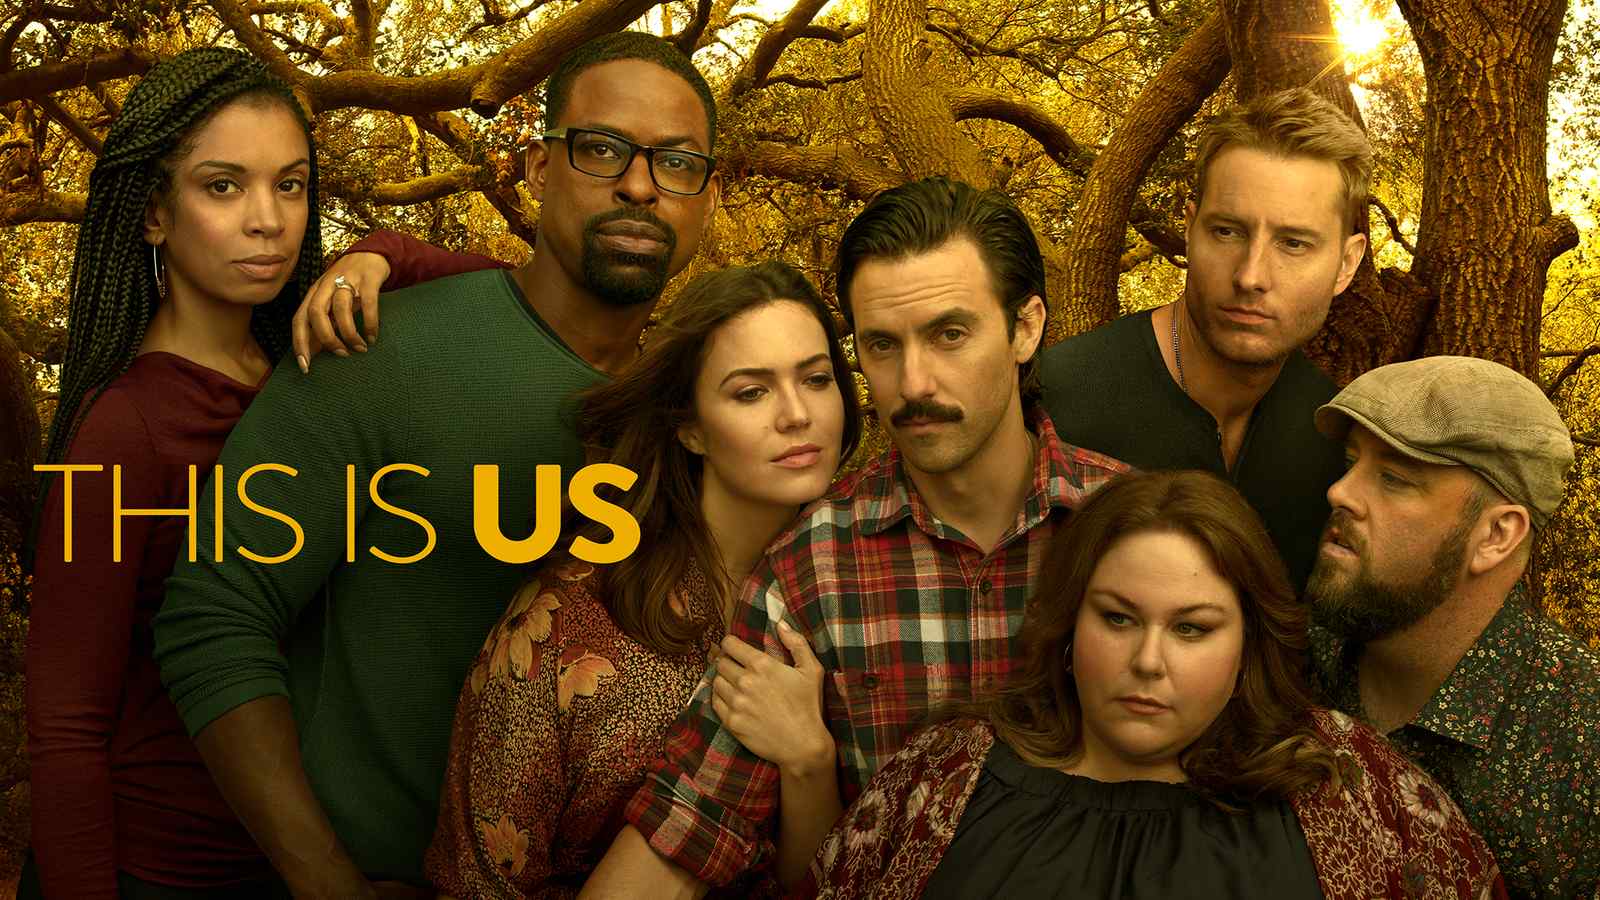 "I Remember Everything" Featured on Season Premiere of 'This Is Us'